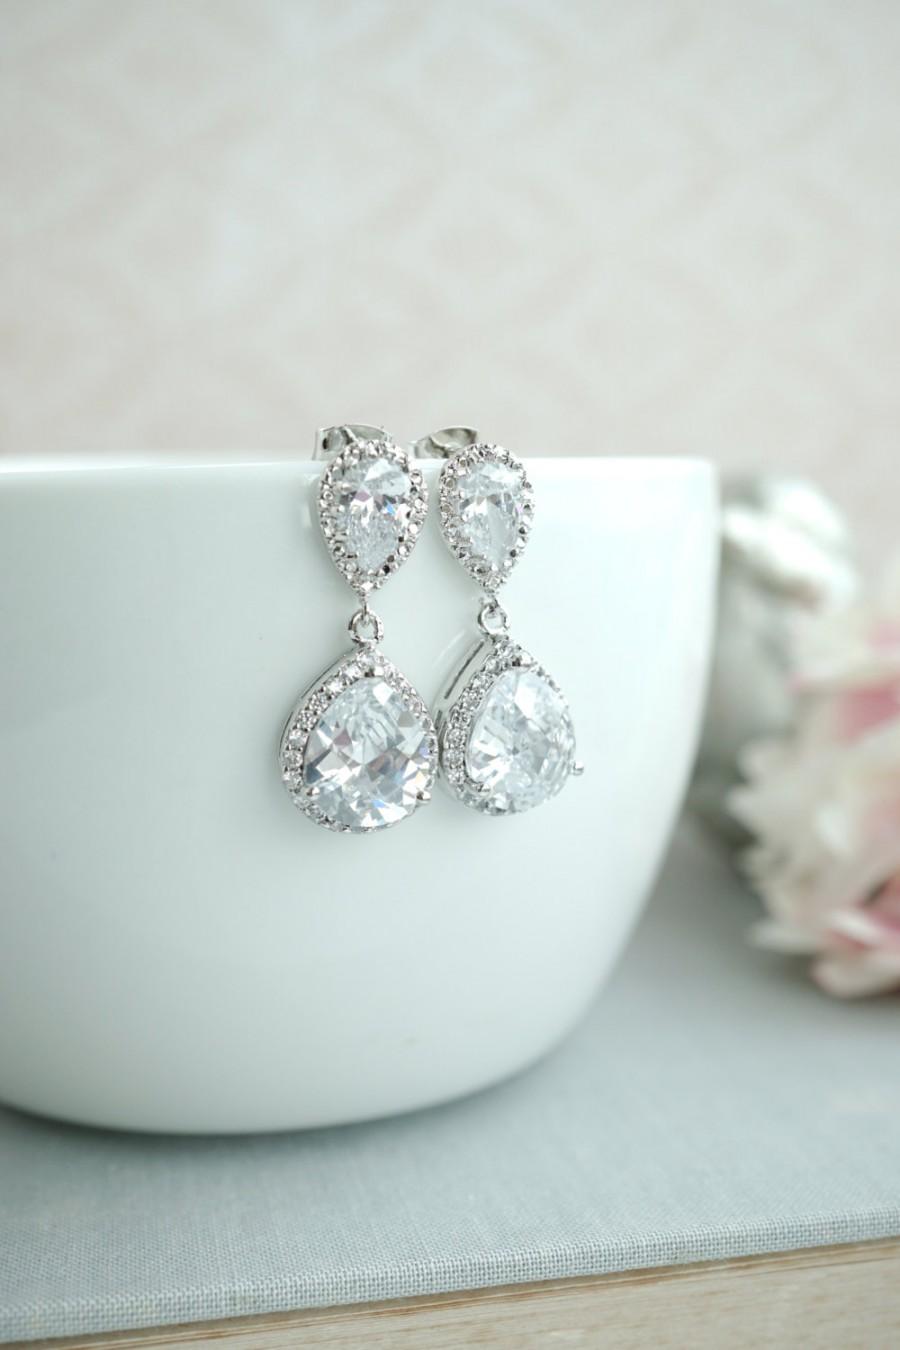 Mariage - Bridal Earrings, Cubic Zirconia Earrings, Rhodium Plated Pear Drop Luster Large Luxe Jewels Earrings. Bridesmaids Jewelry, Bride Earrings